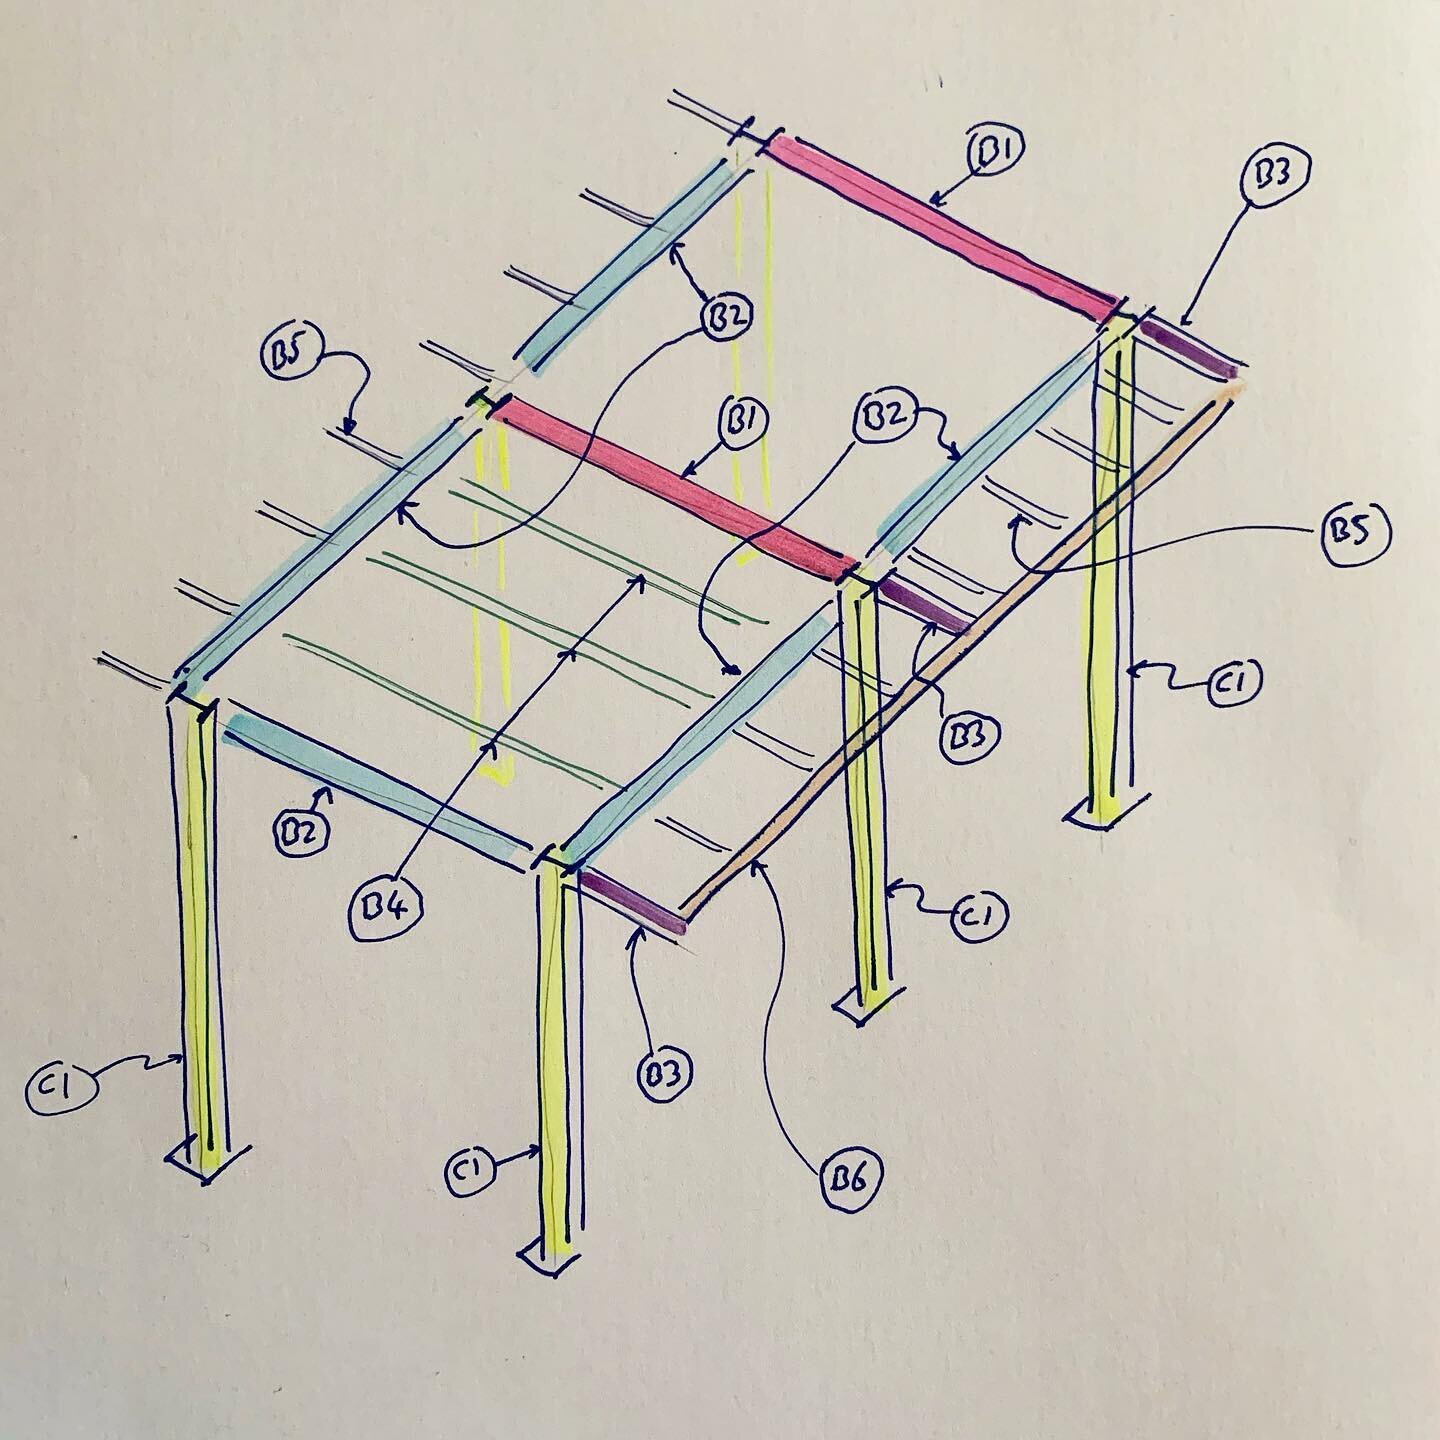 3D sketch - part of the calculation package for the design of an industrial steel frame. 
 
#structuralengineering #structuralengineer #structuralsteel #steelwork #sketch #3d